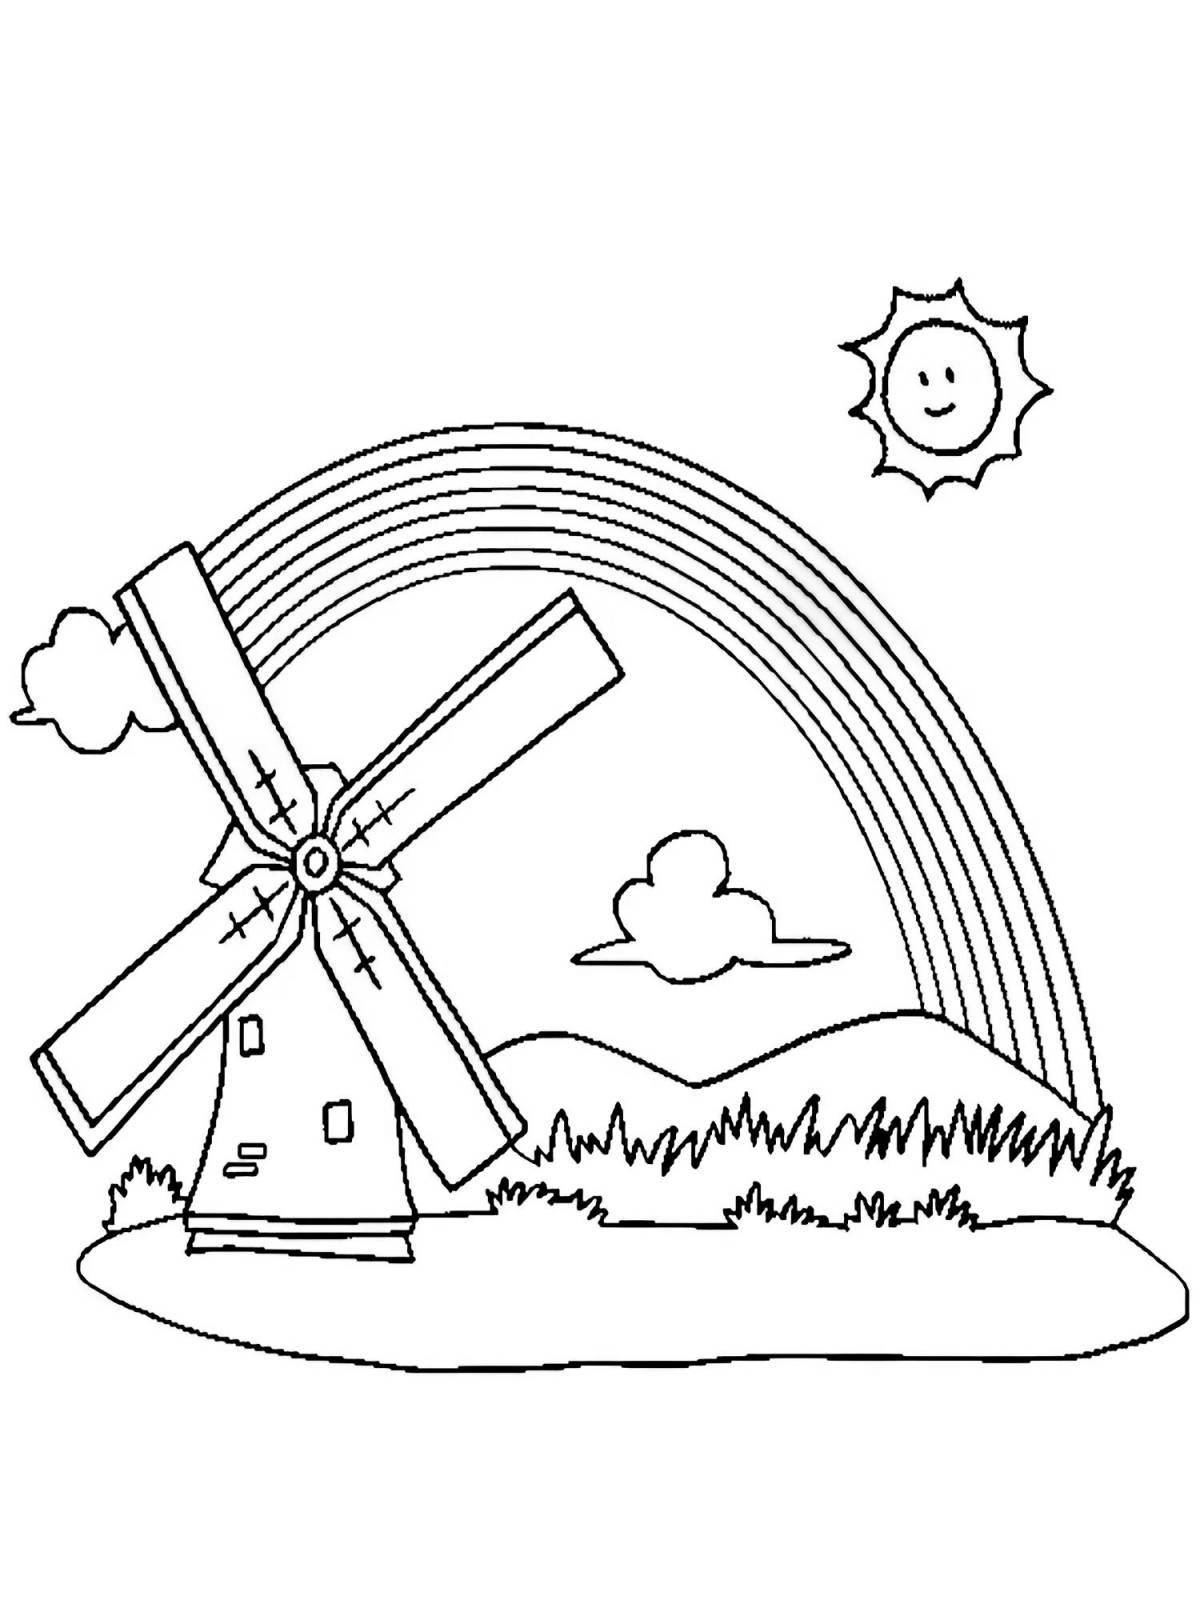 Adorable windmill coloring book for kids